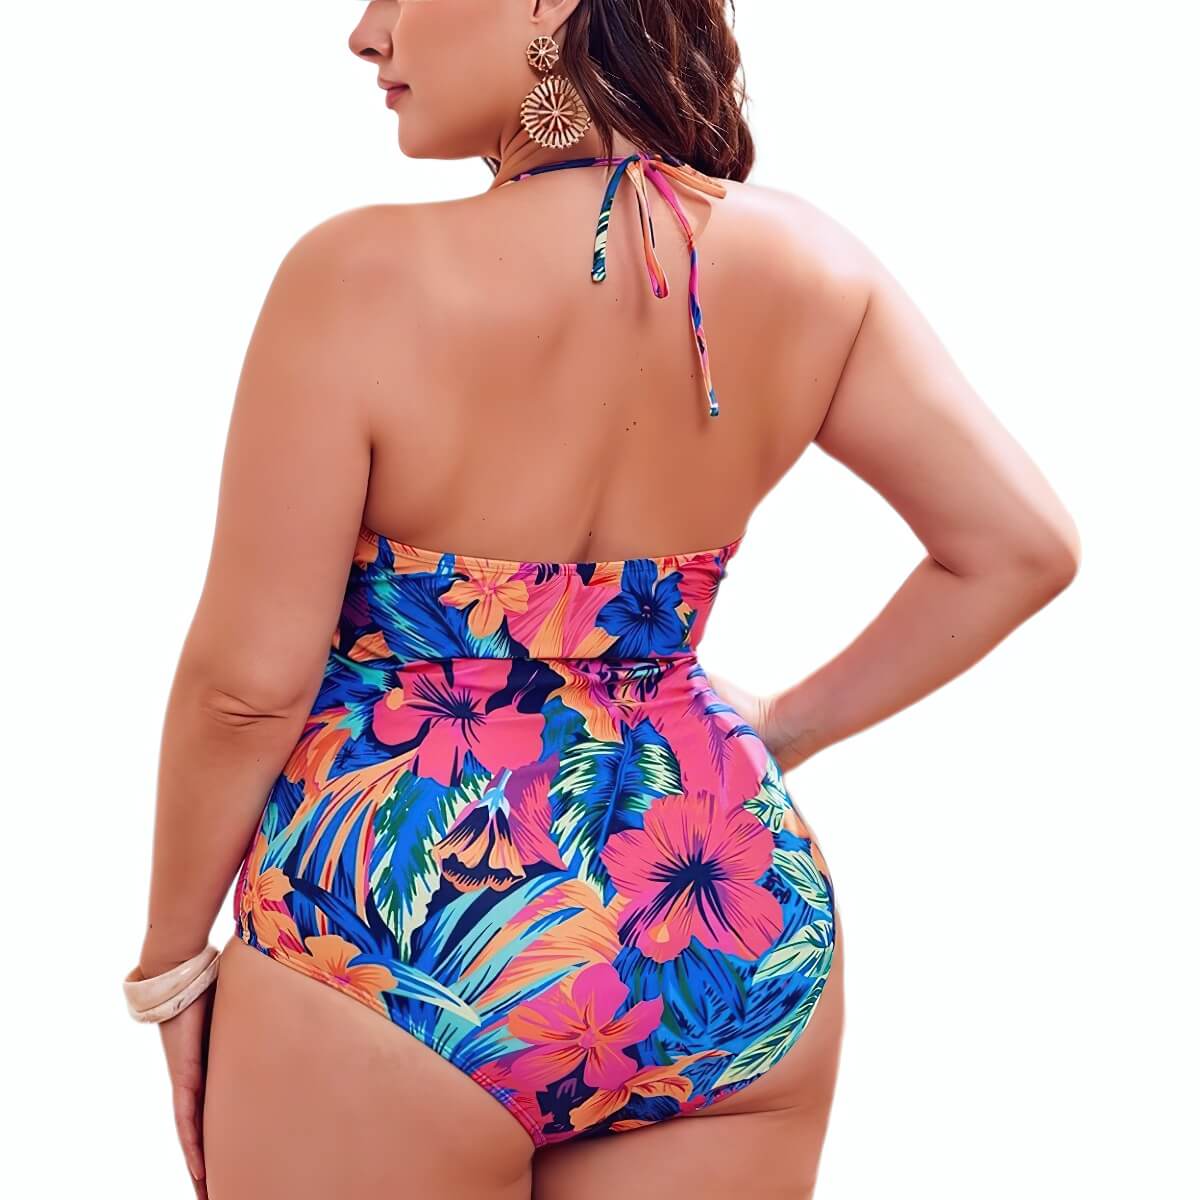 Plus Size High Neck Swimsuit for Women